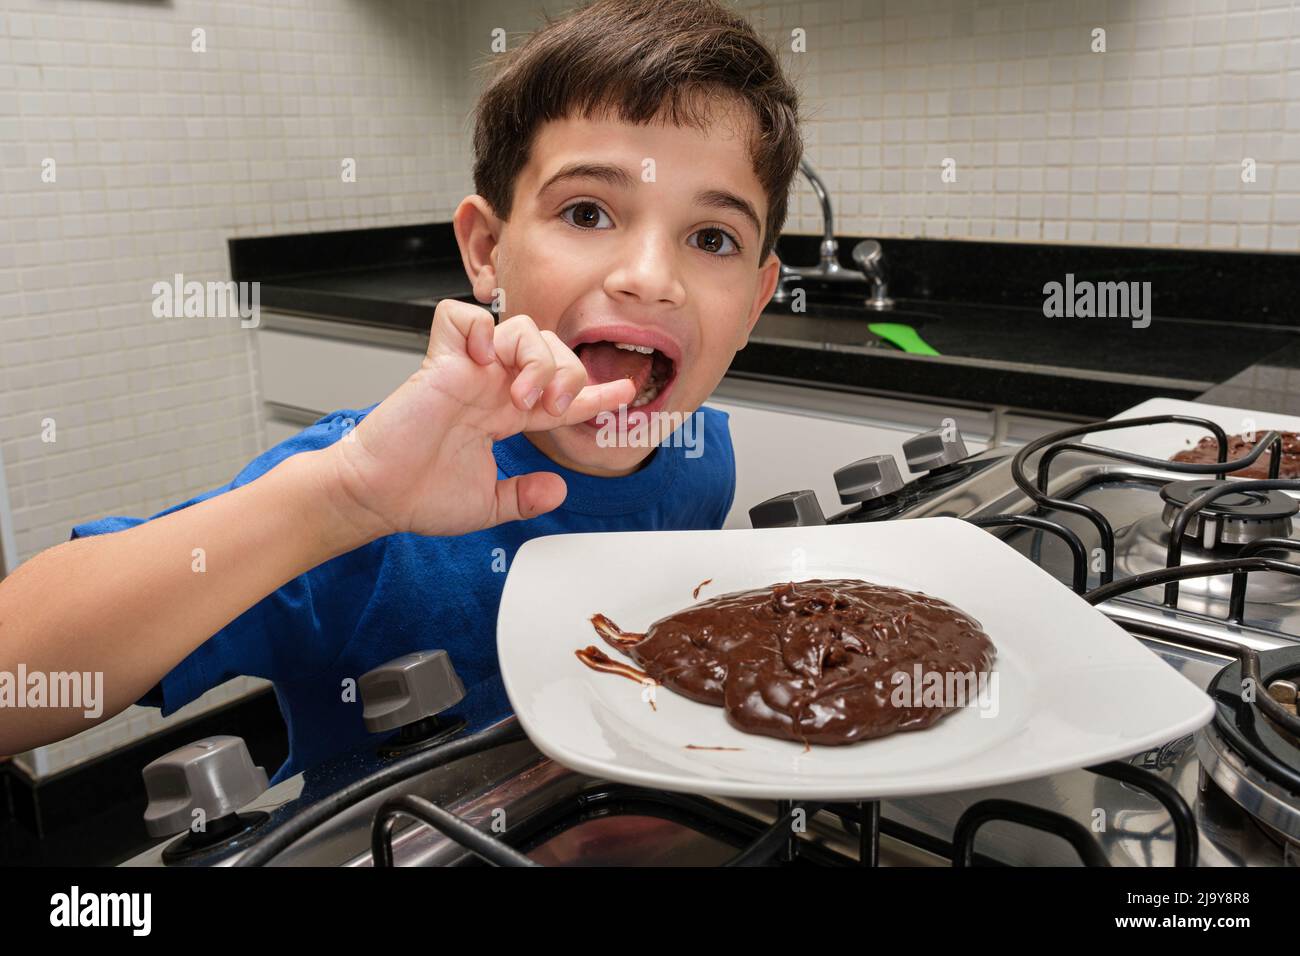 8 year old child in front of a plate of sweet brigadeiro and licking his finger. Stock Photo